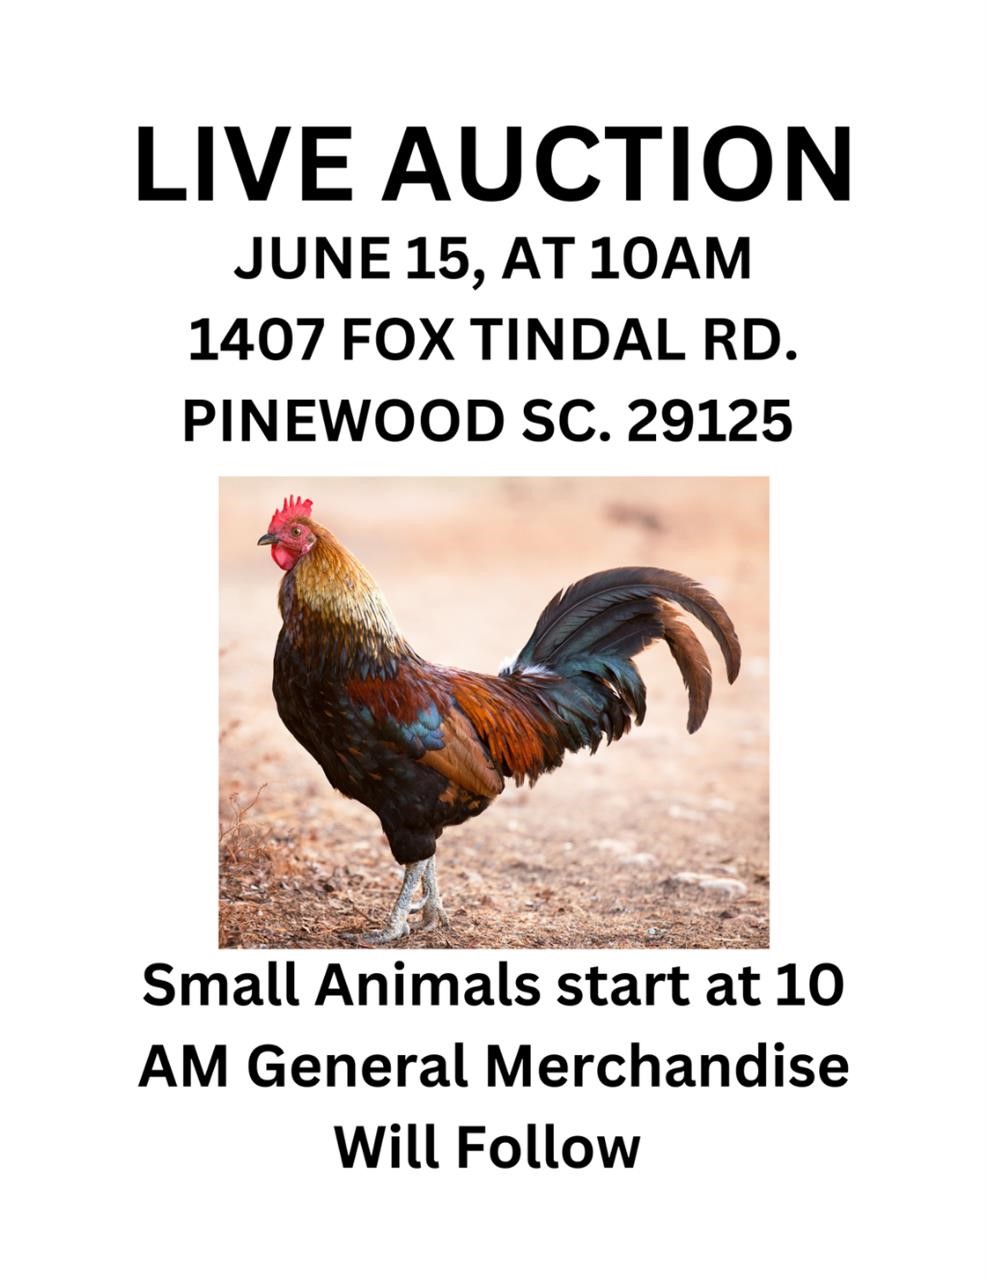 Tindal Farm Auction small animals and general merchandise